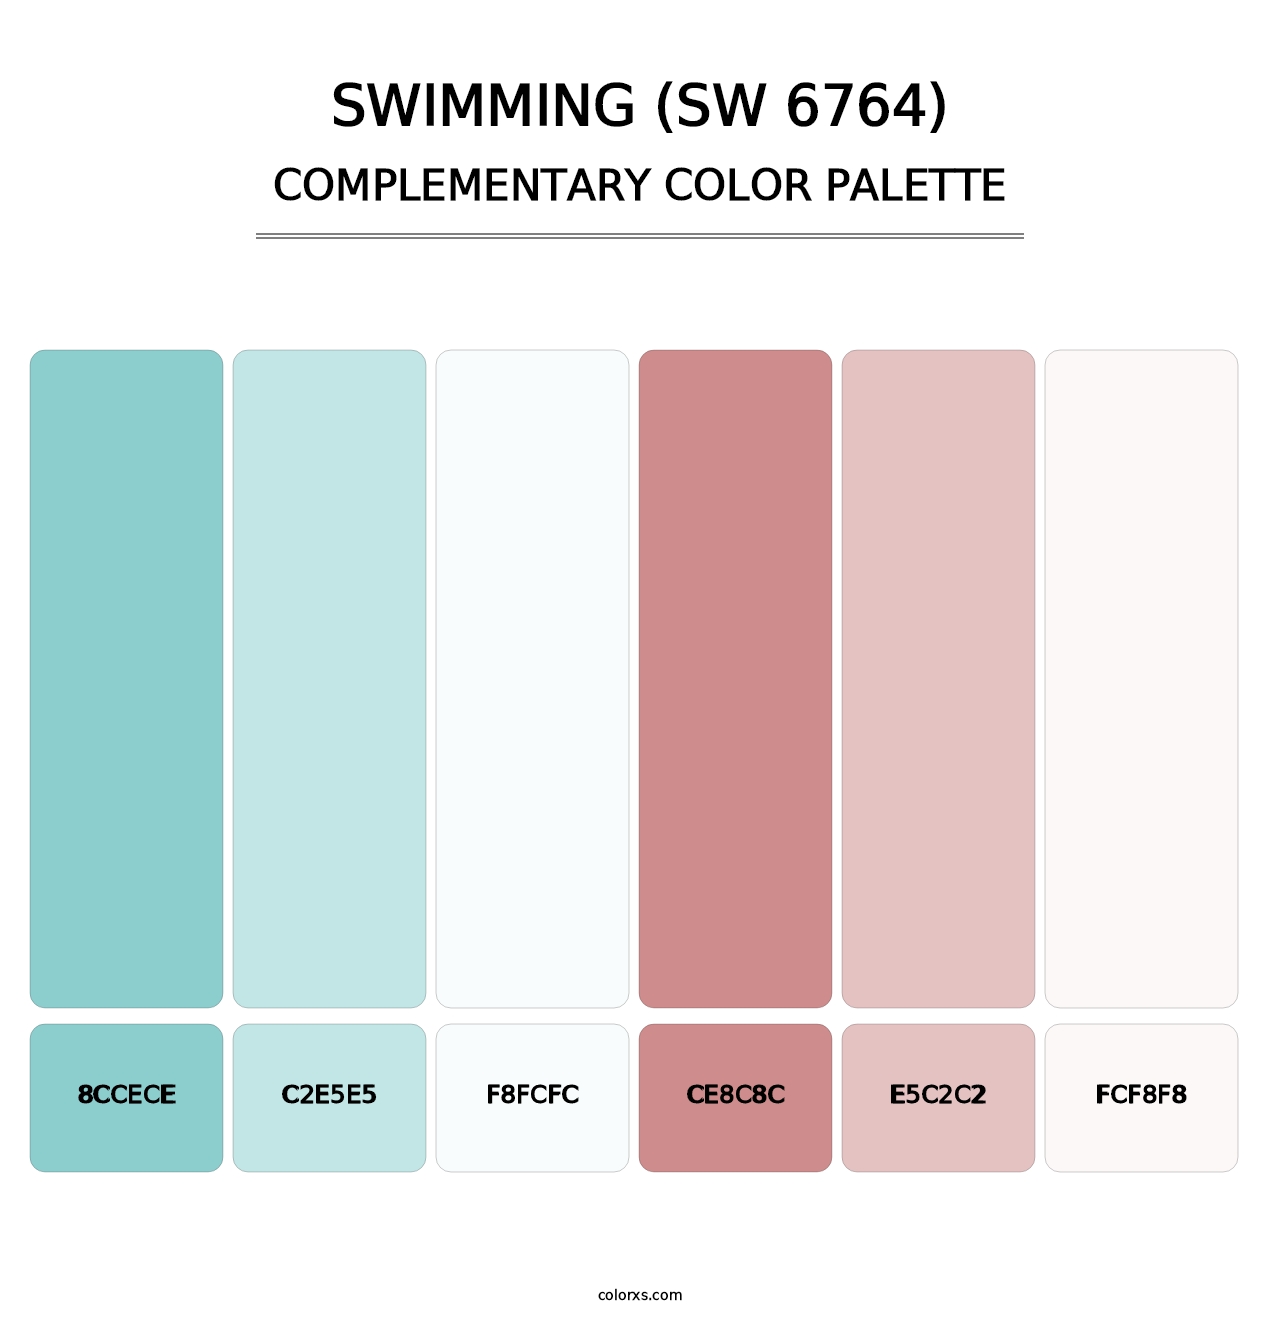 Swimming (SW 6764) - Complementary Color Palette